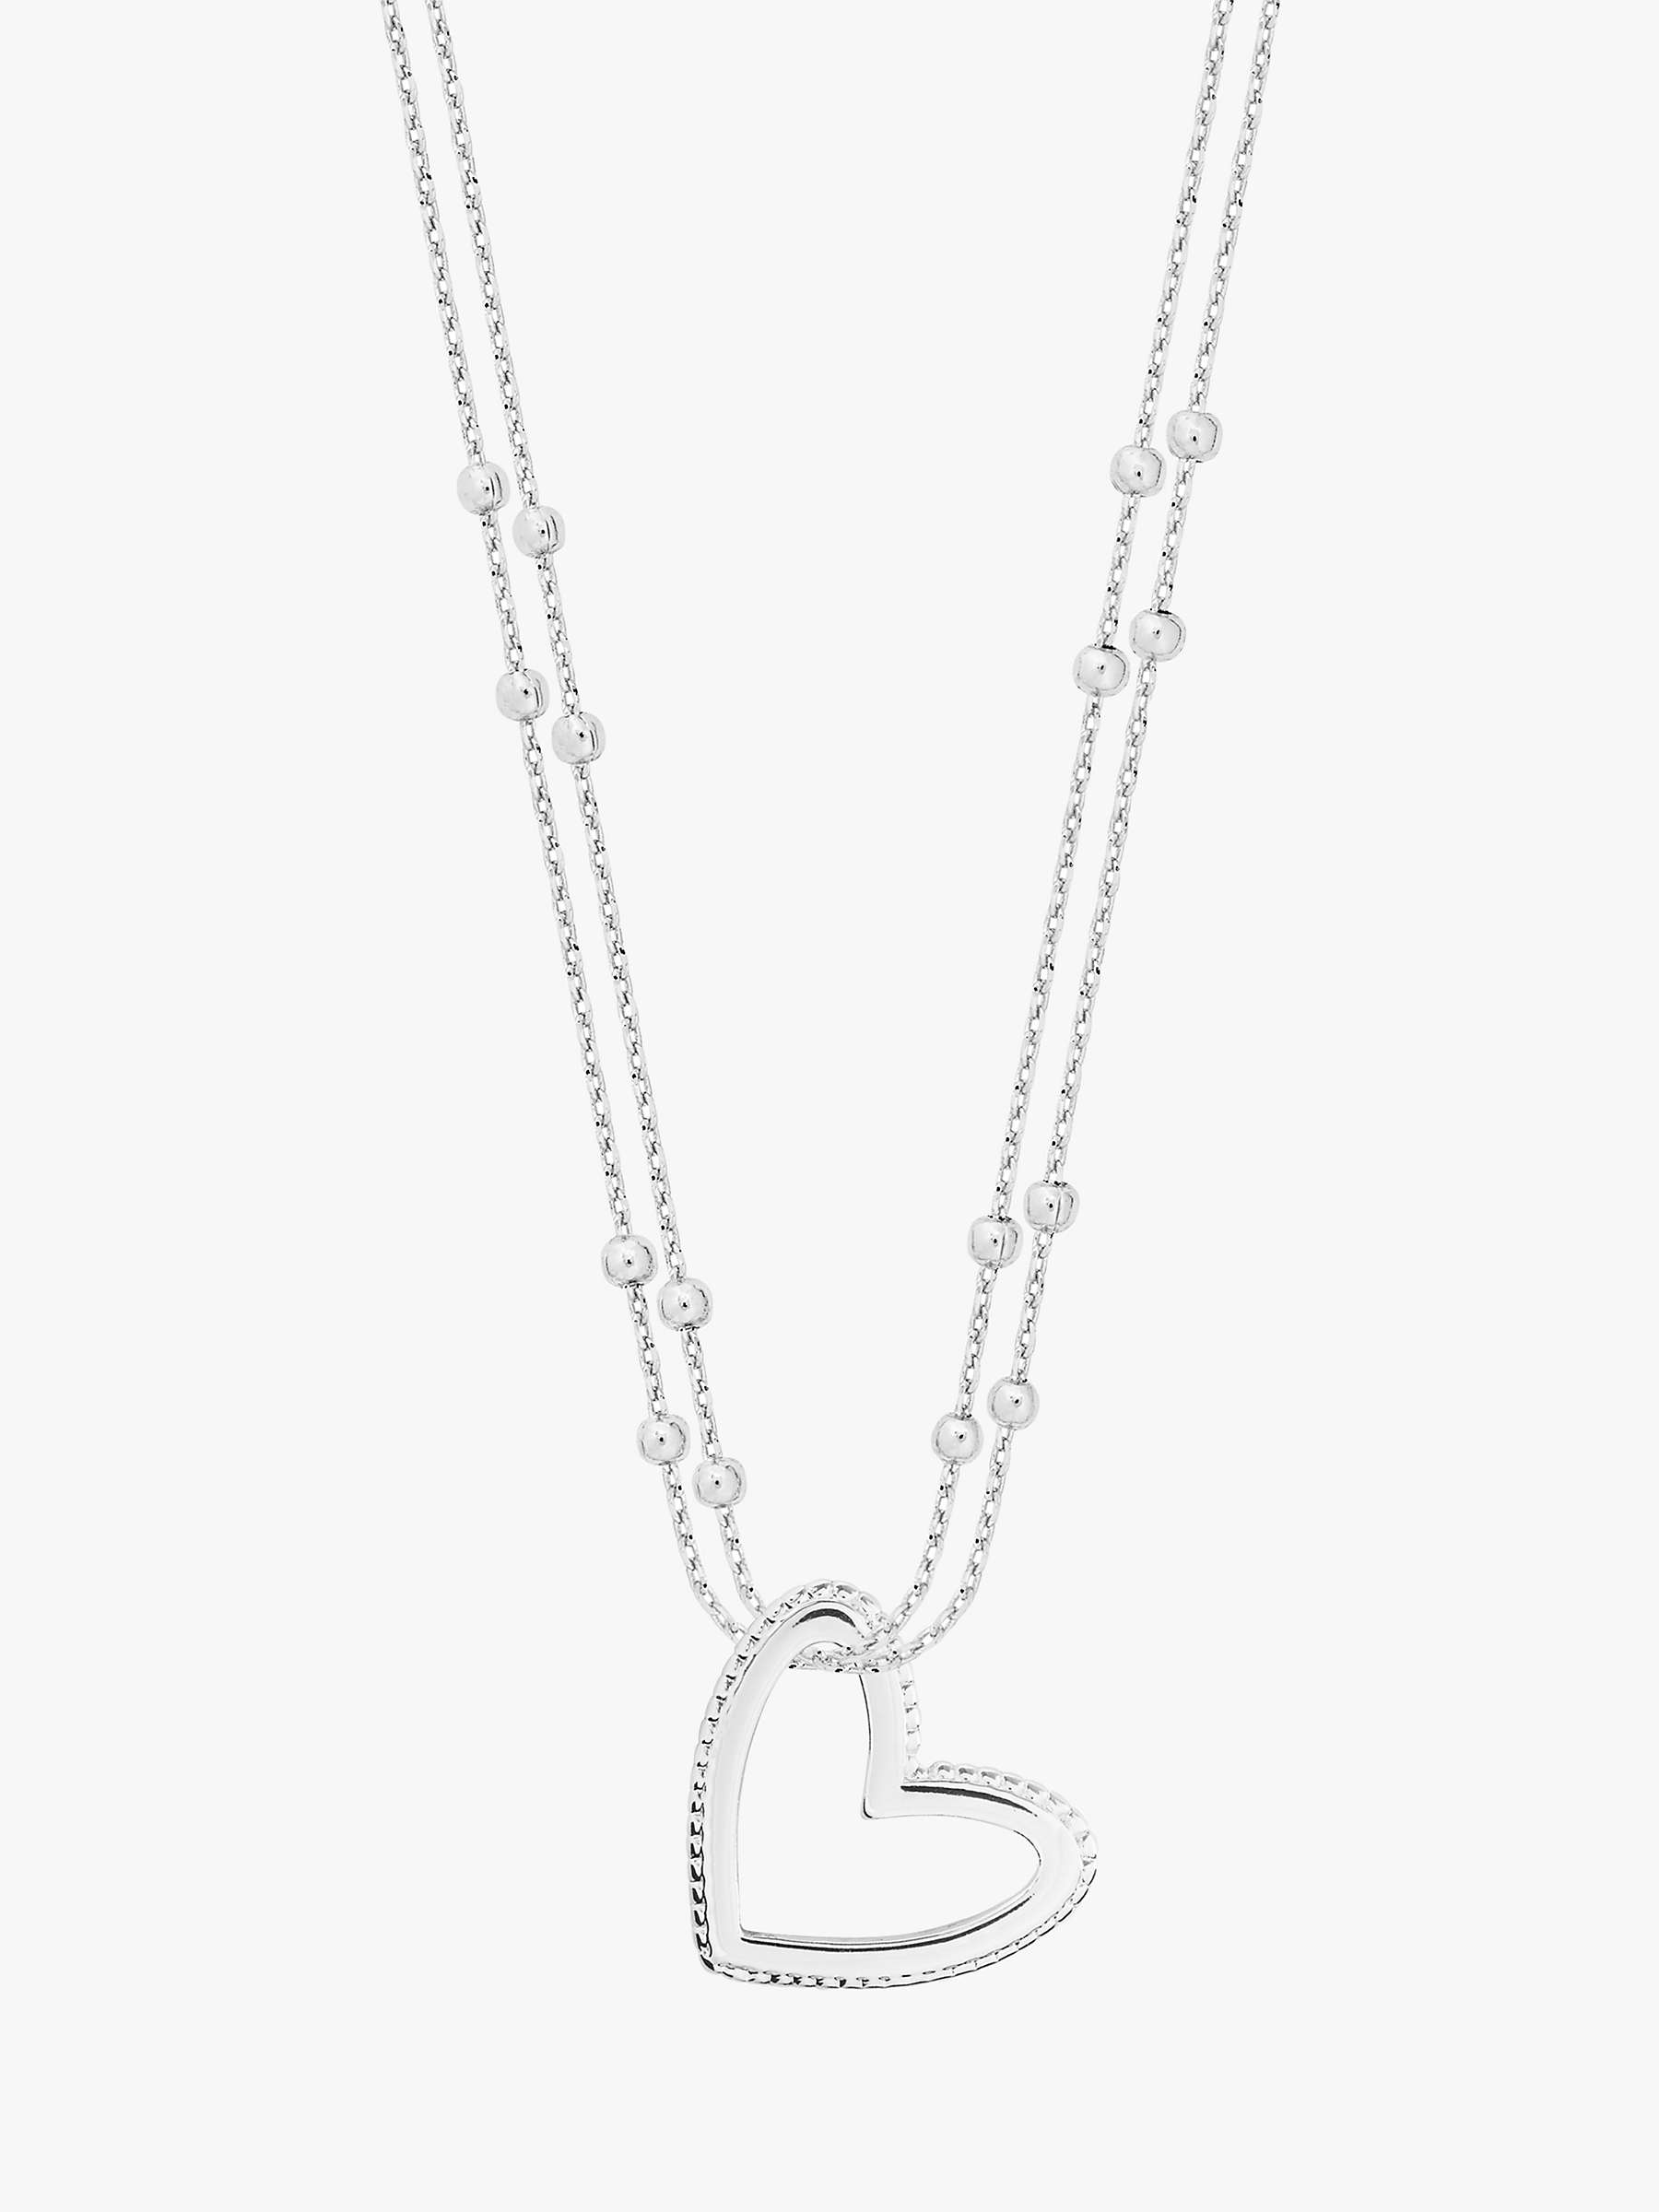 Buy Joma Jewellery Aurora Heart Pendant Necklace, Silver Online at johnlewis.com